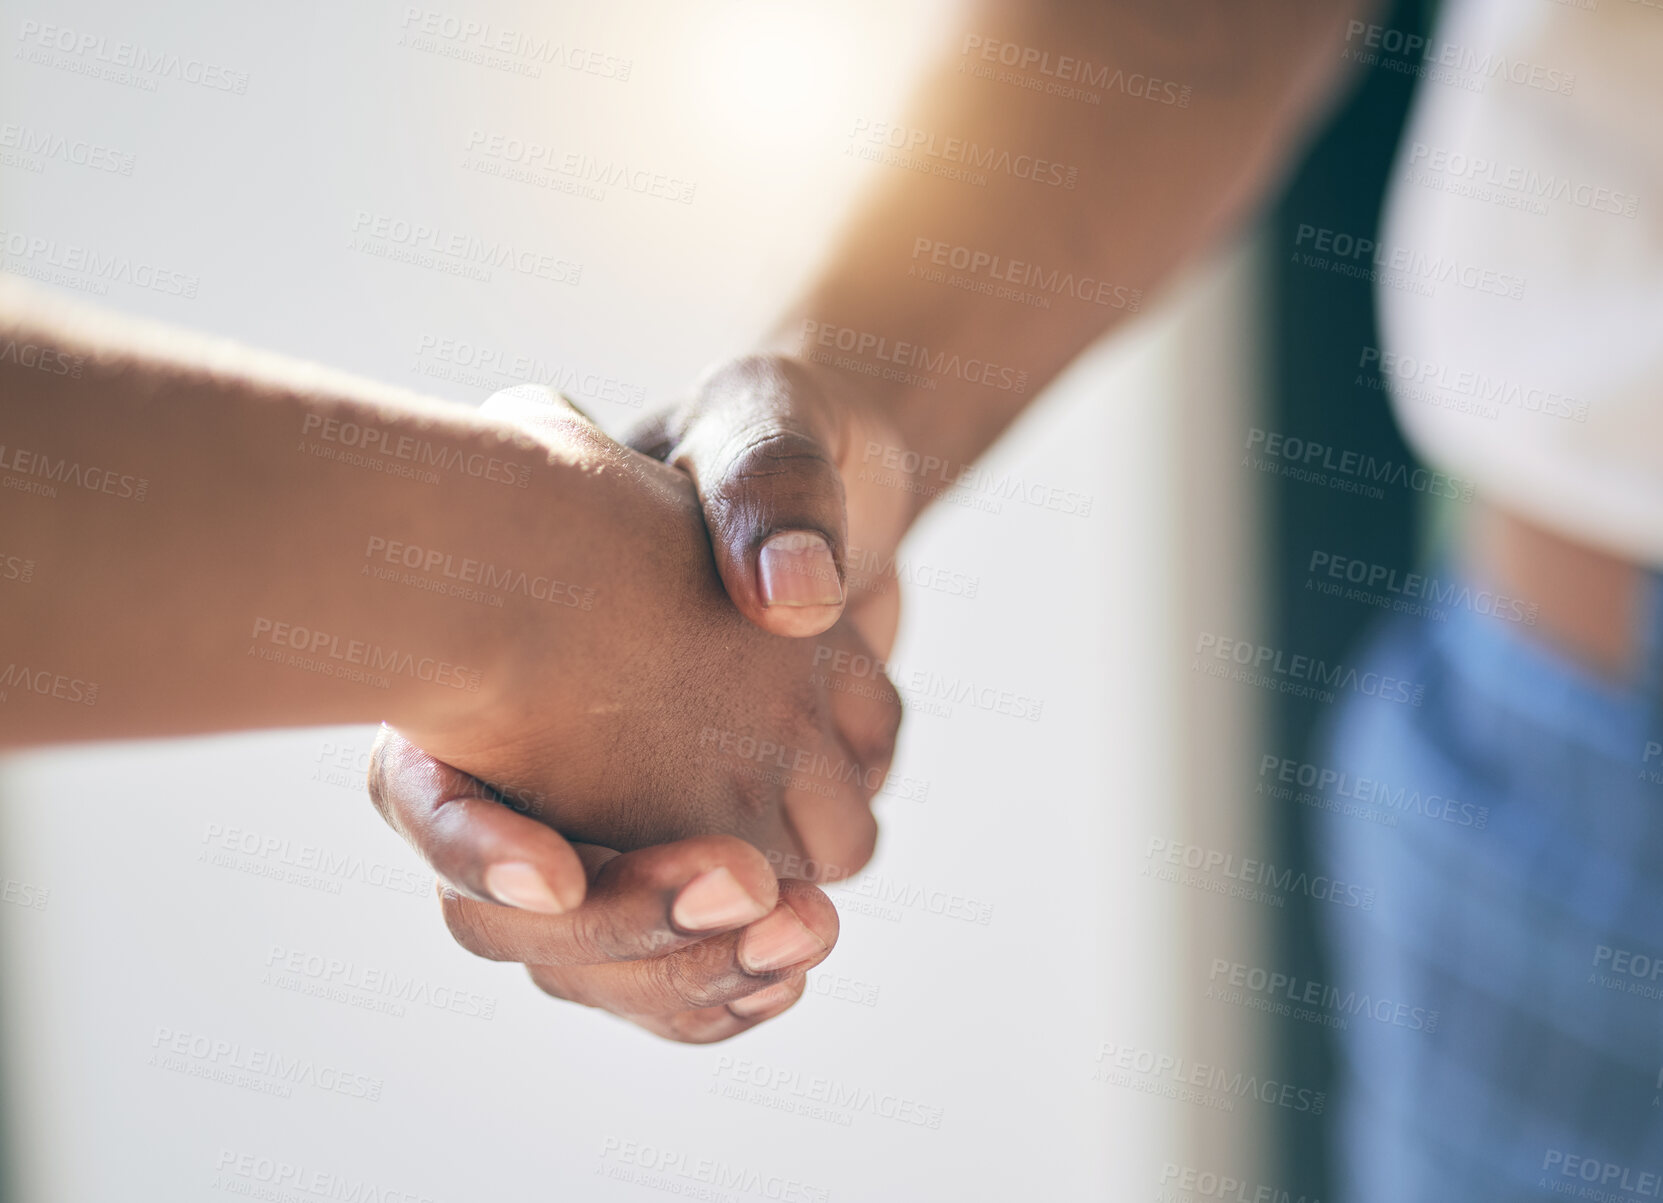 Buy stock photo Handshake, agreement and hands of people meeting introduction for partnership together as a team with trust. Greeting, accept and thank you or welcome gesture for deal, collaboration and support